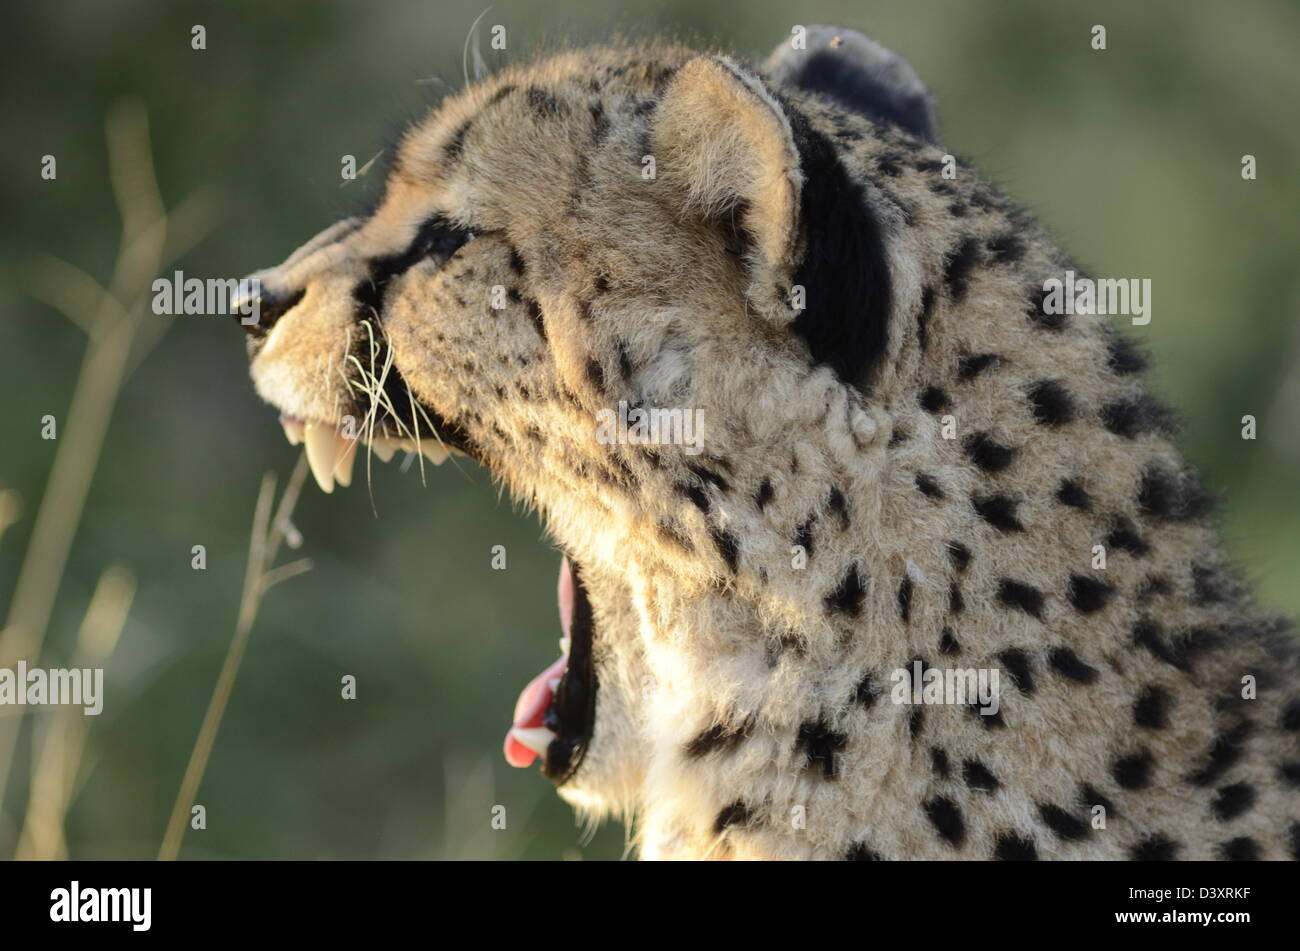 Photos of Africa , Cheetah head facing away from camera mouth open Stock Photo